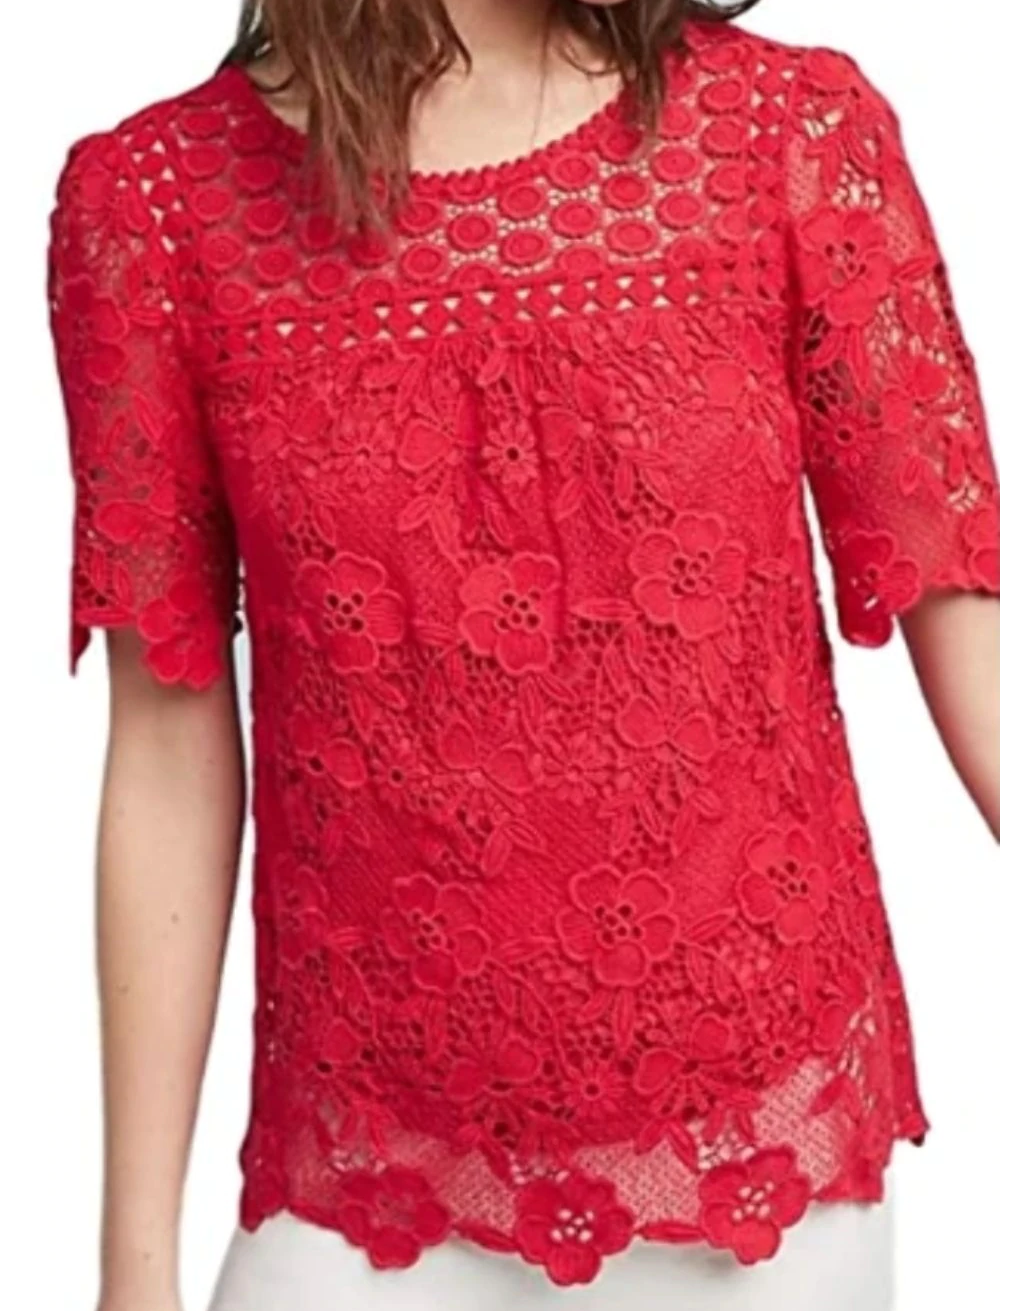 Anthropologie Top Womens 0 Red Short Sleeve Round Neck Lace A-line Blouse